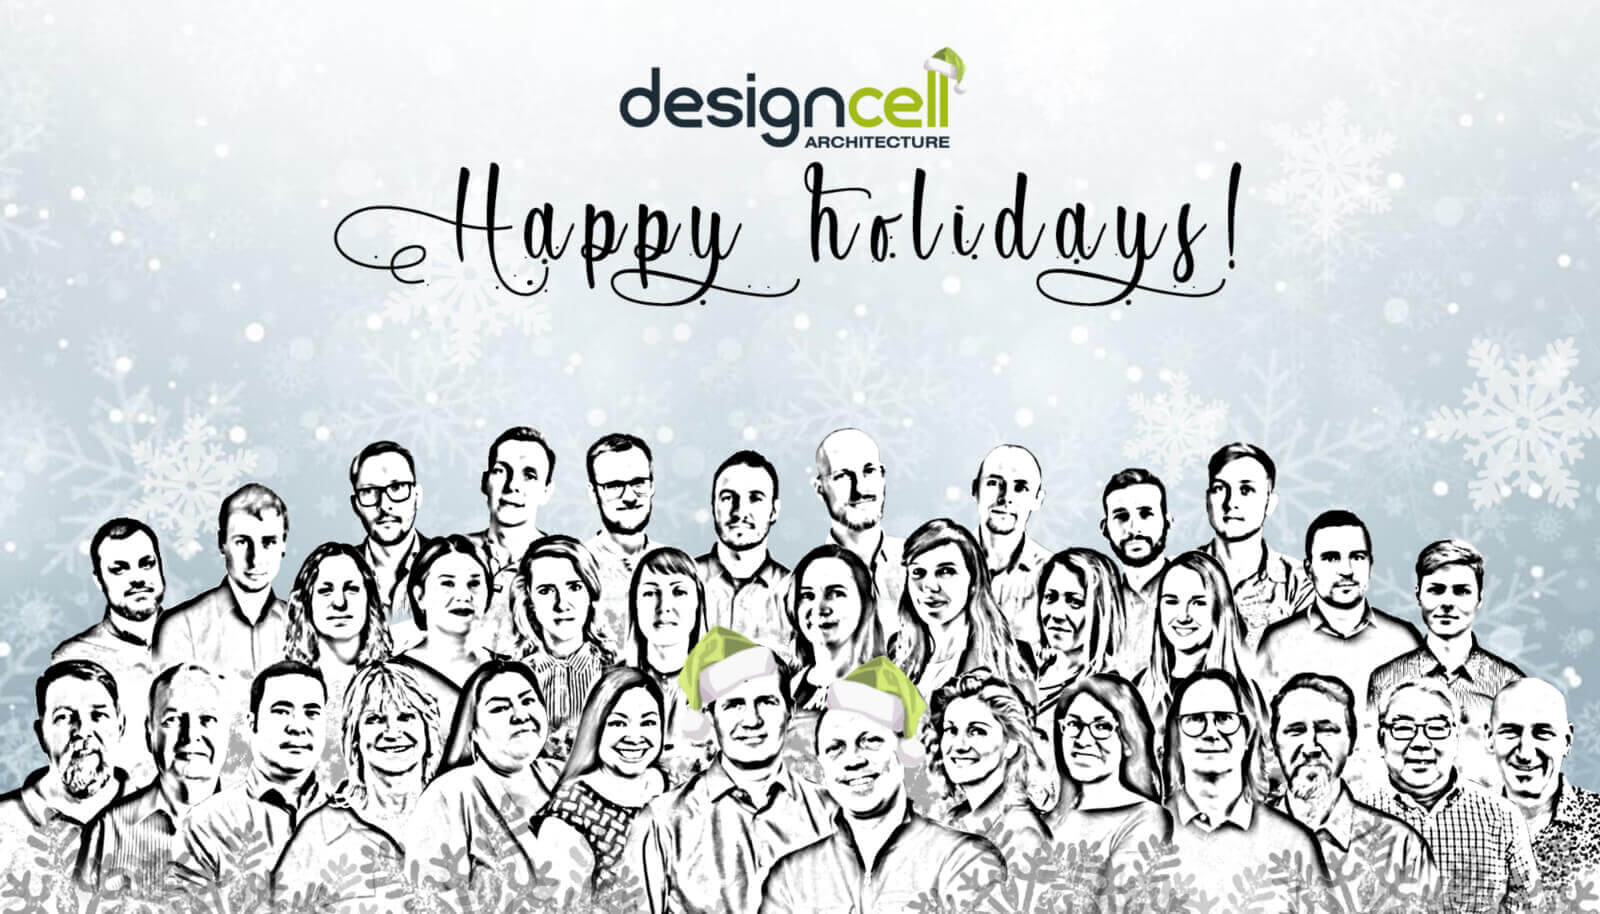 Happy Holidays from DesignCell!